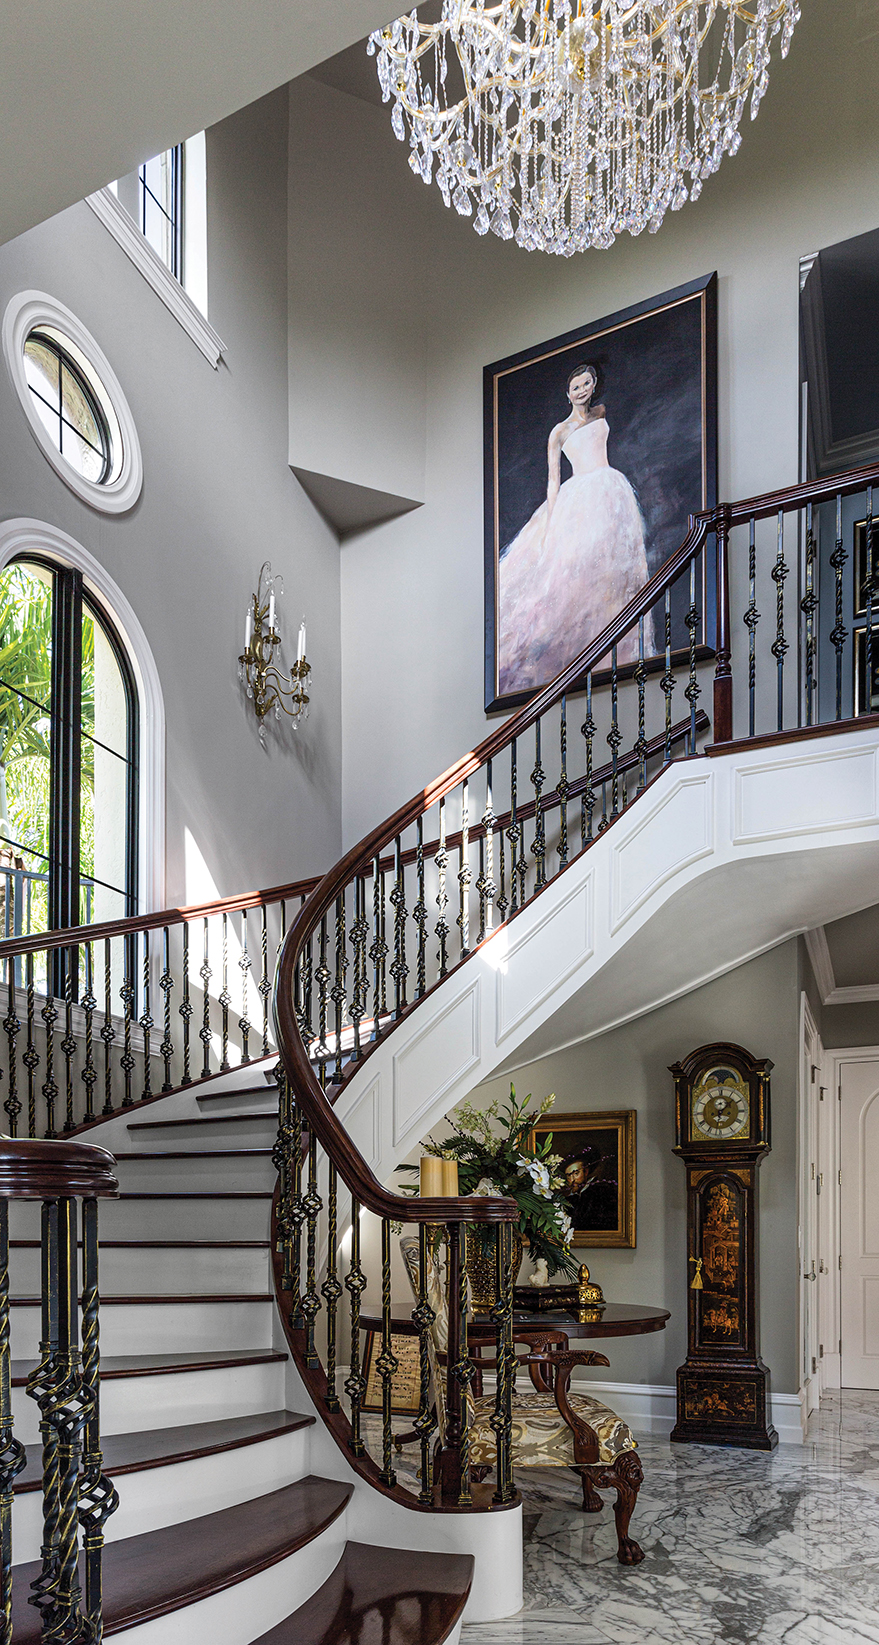 Curved wooden grand staircase